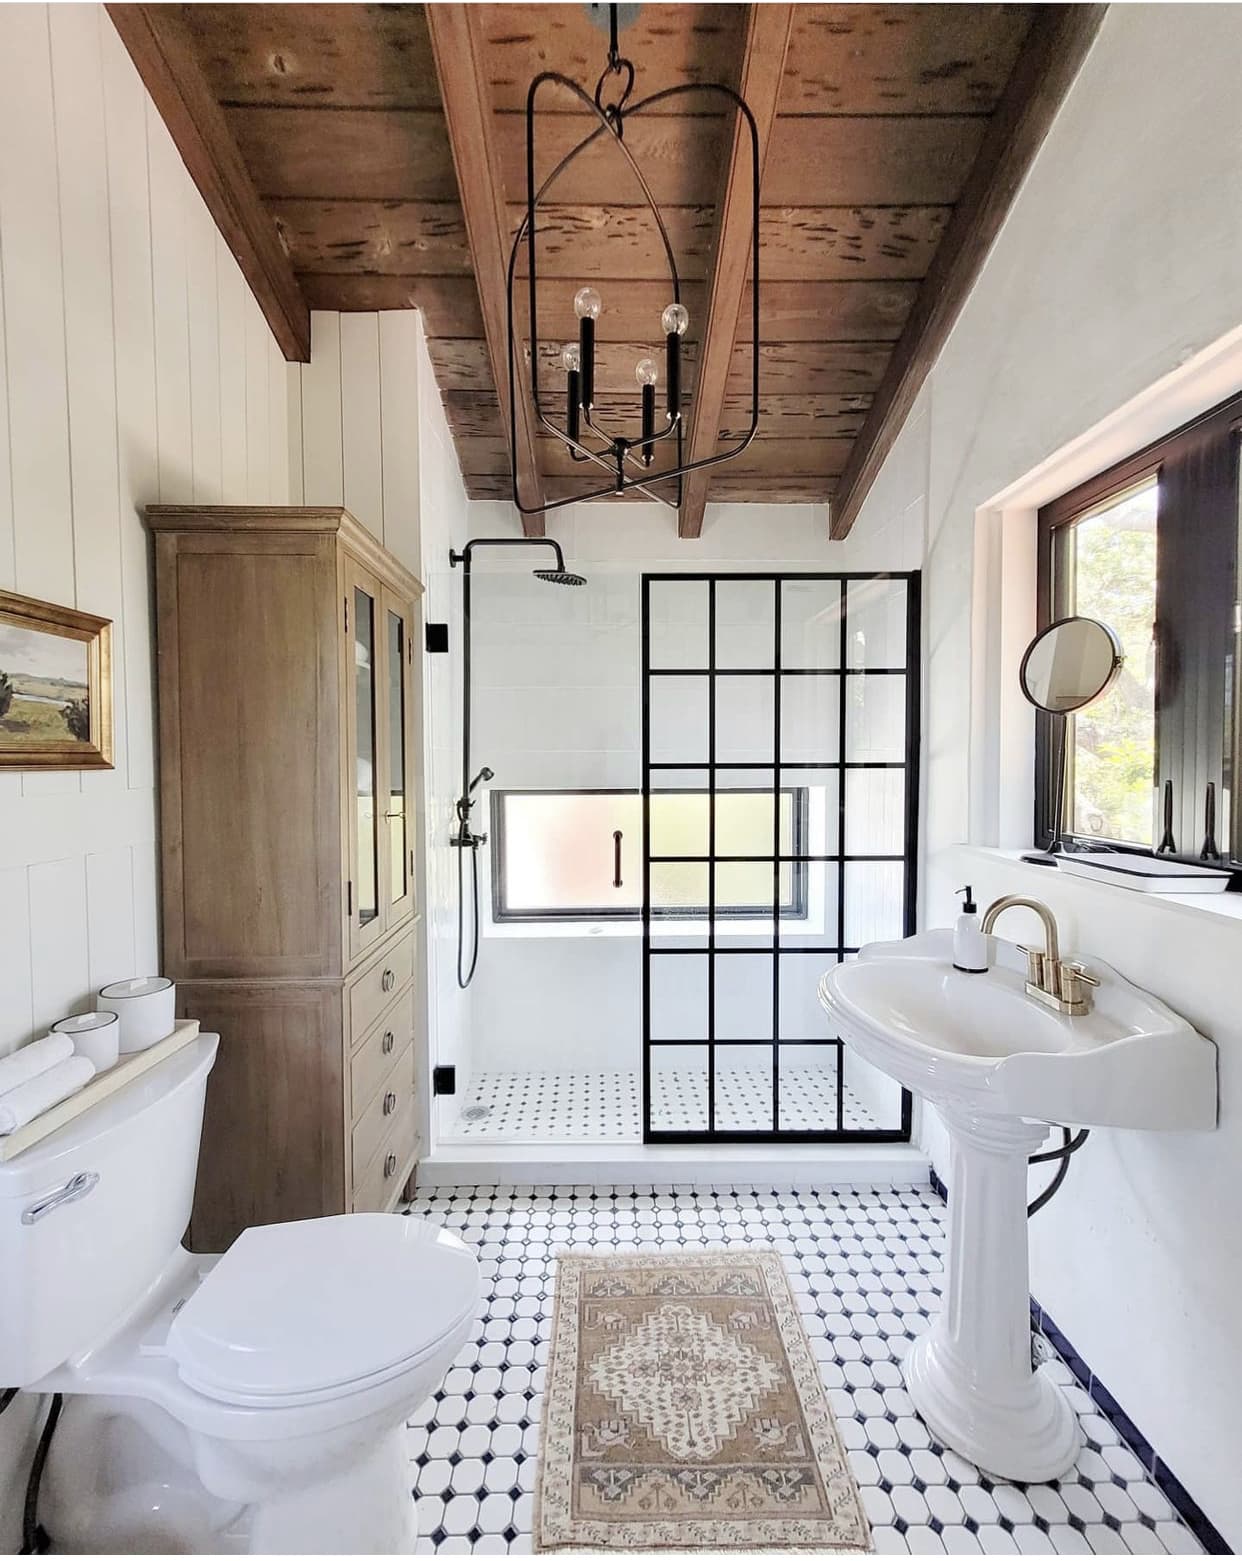 vintage pedestal sink with black and white patterned tile flooring in a rustic farmhouse bathroom.